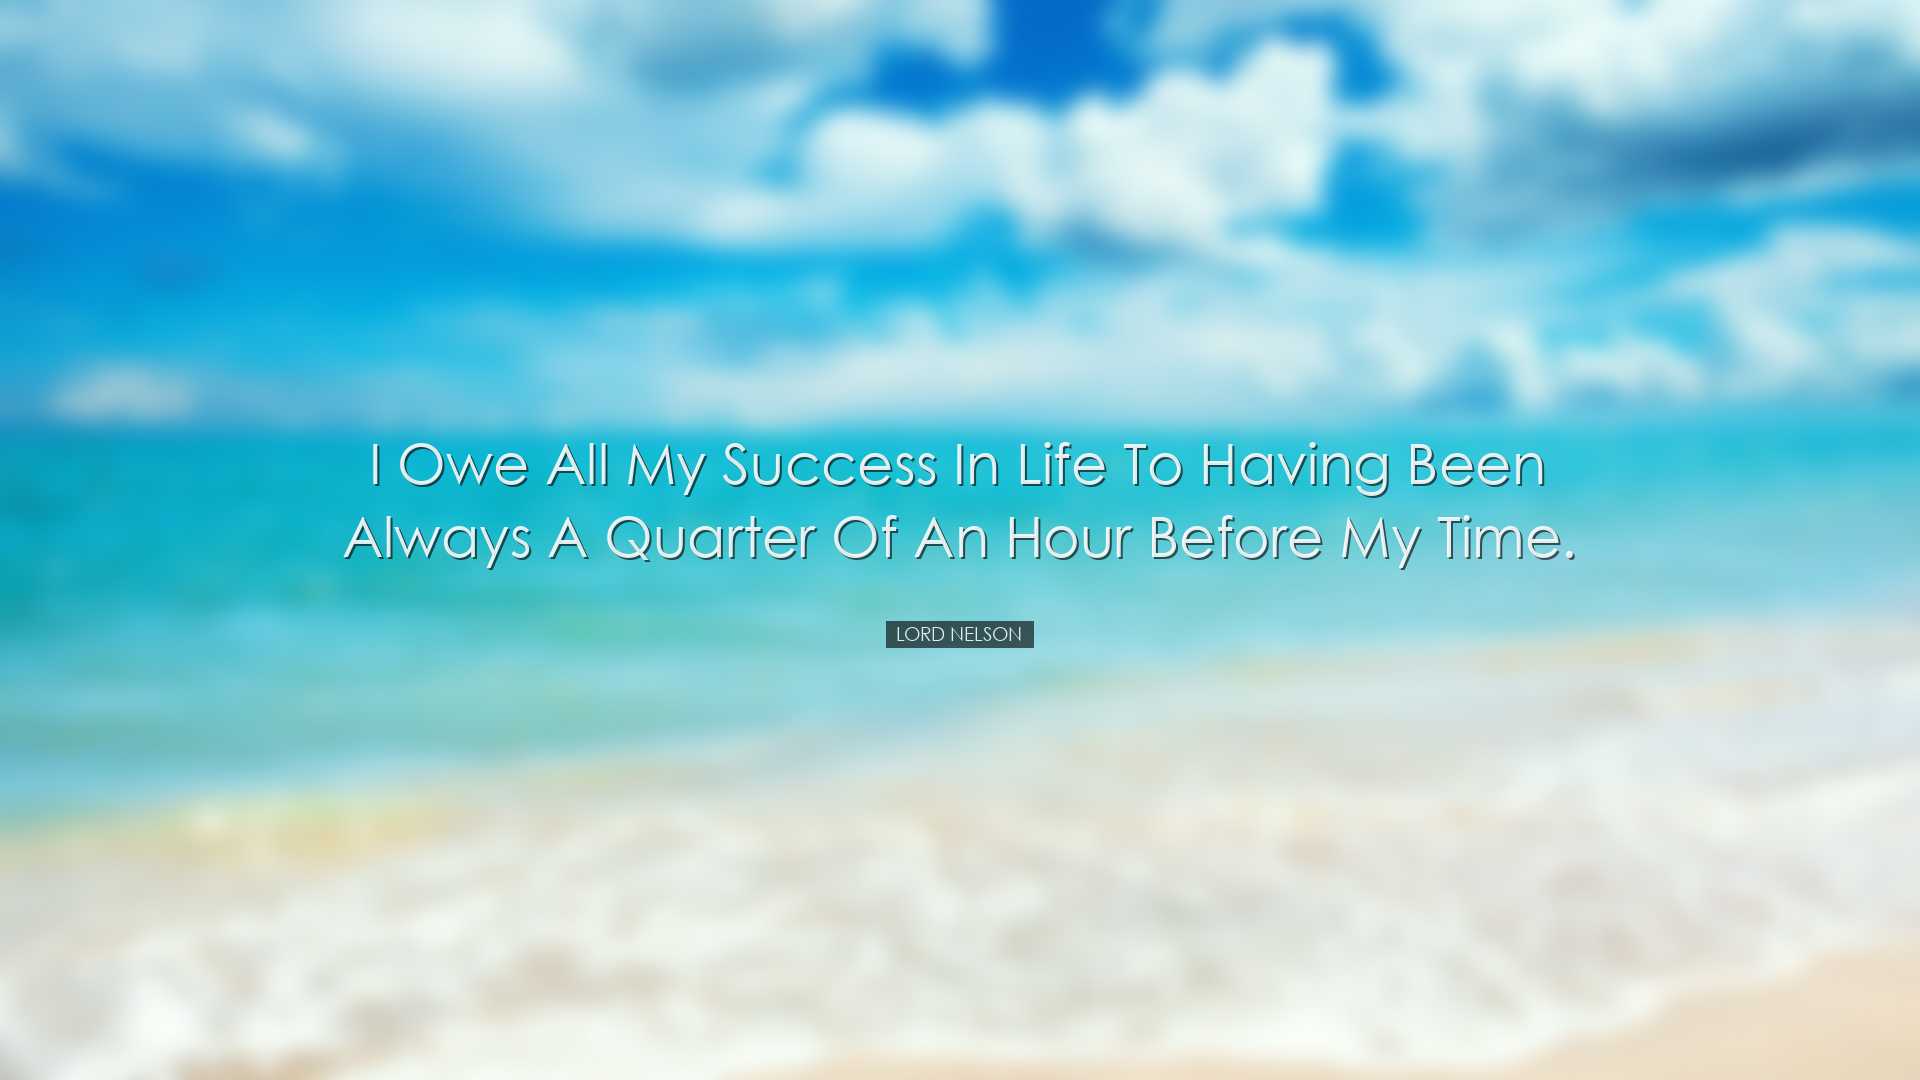 I owe all my success in life to having been always a quarter of an